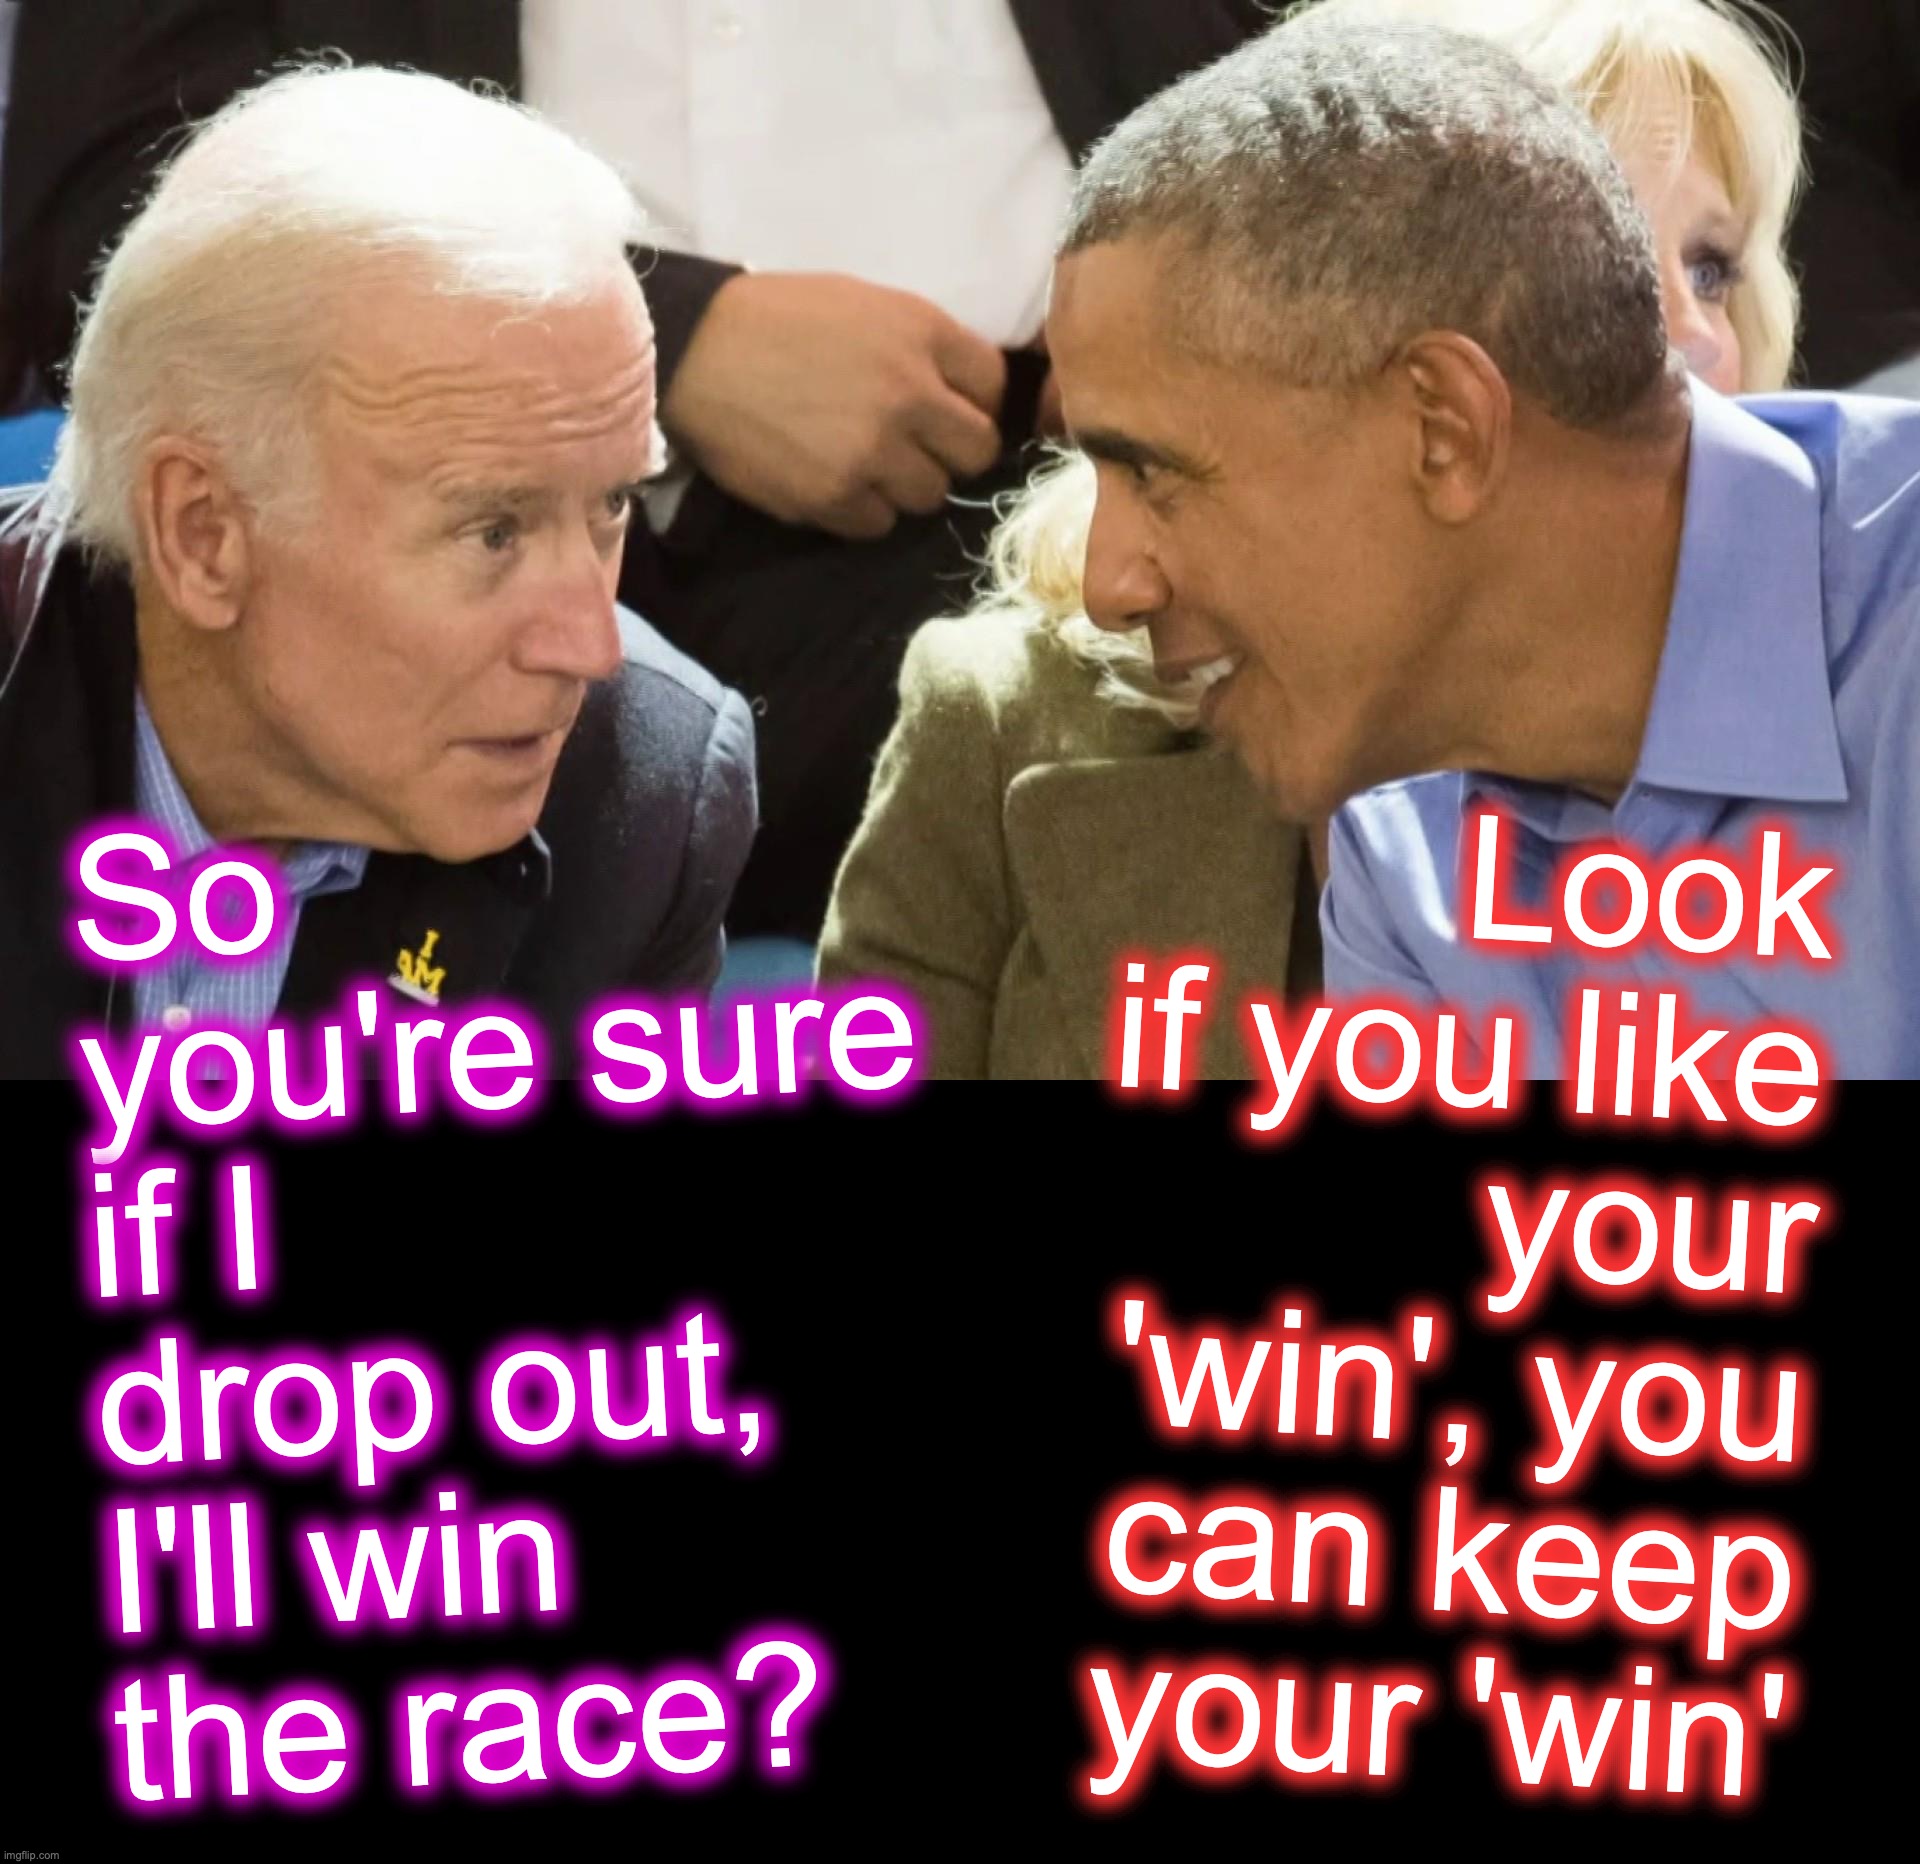 [warning: heads-you-win-tails-I-lose satire] | Look if you like your 'win', you can keep your 'win'; So you're sure if I drop out, I'll win the race? | image tagged in biden,we've been tricked,barack obama | made w/ Imgflip meme maker